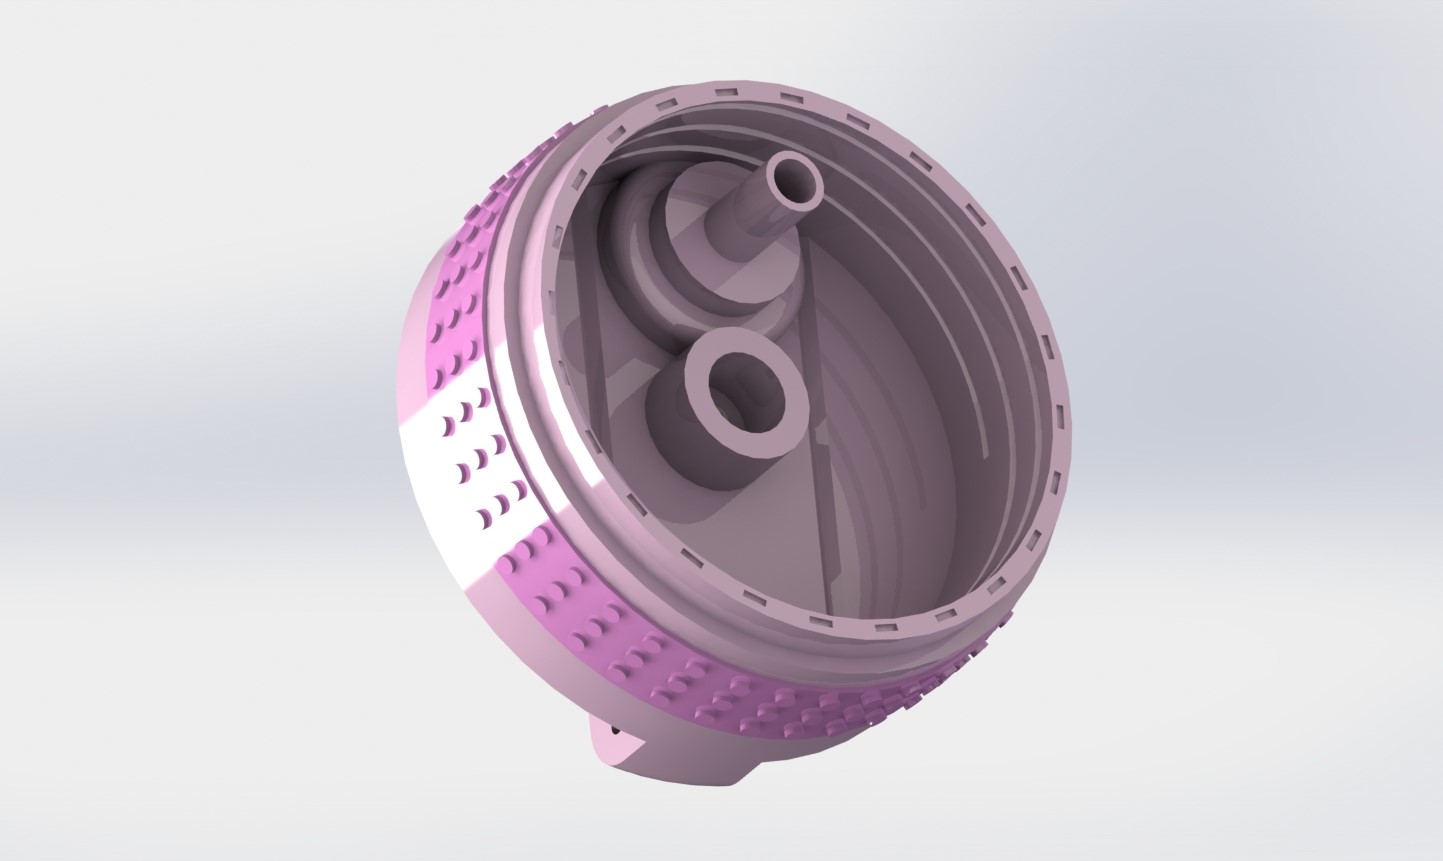 The top piece of a Watterbottle Created in SolidWorks